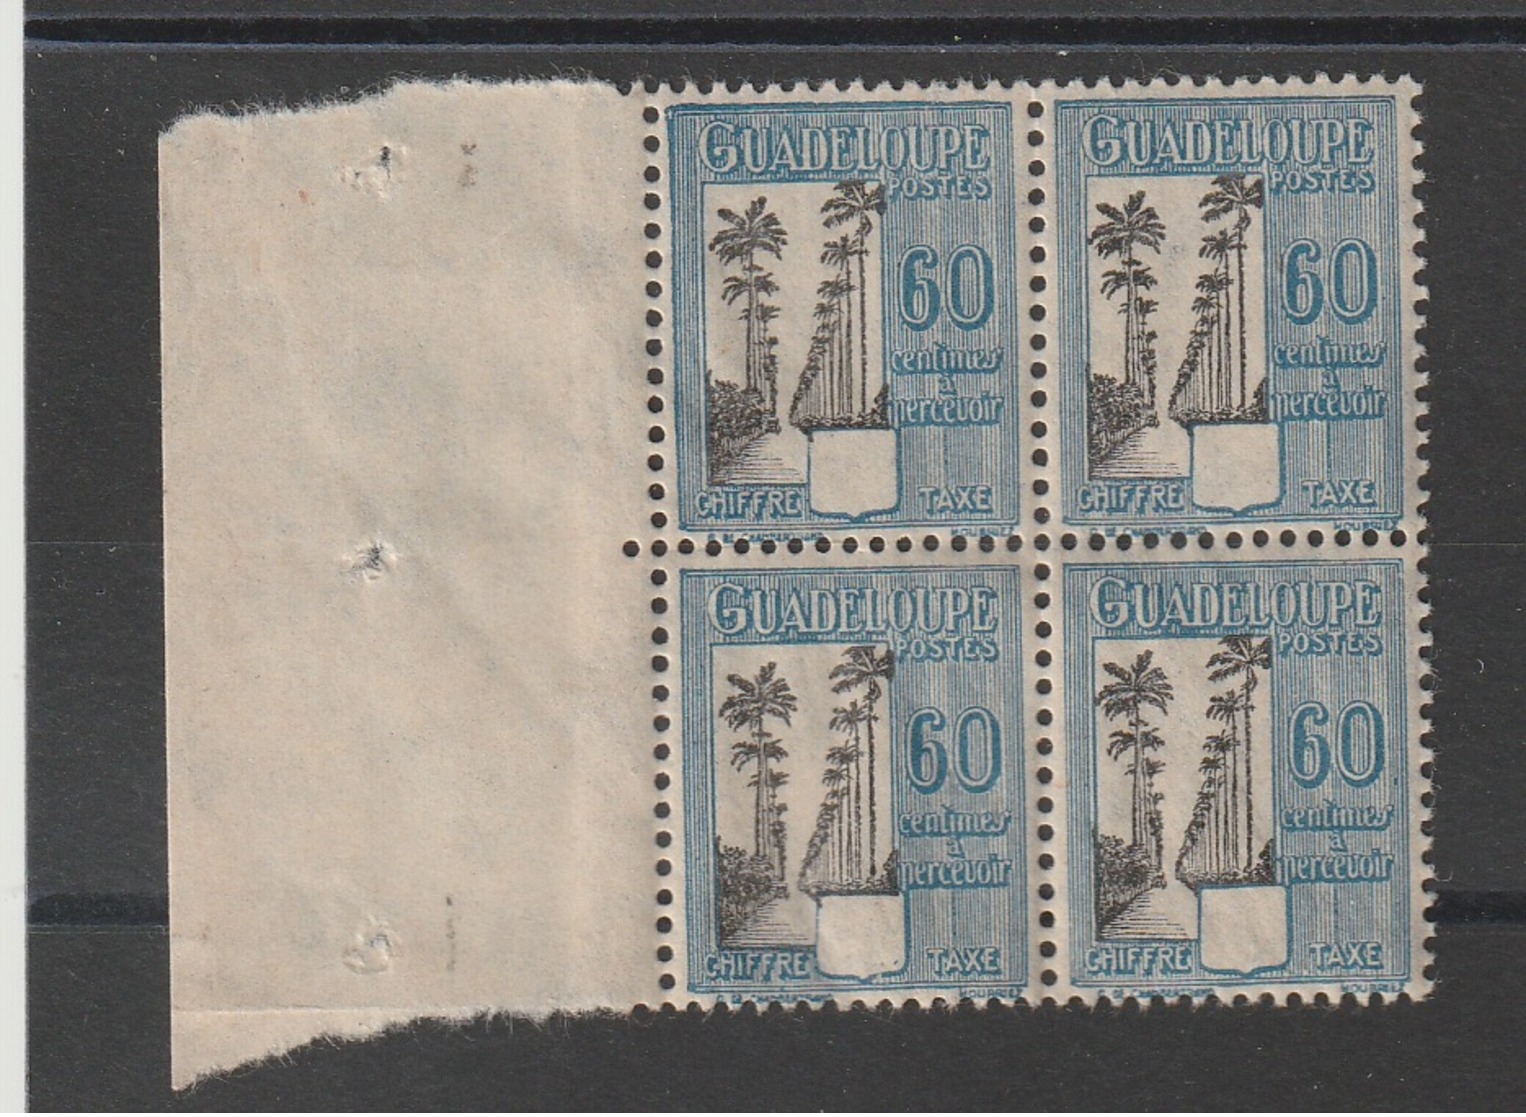 GUADELOUPE - Postage Due